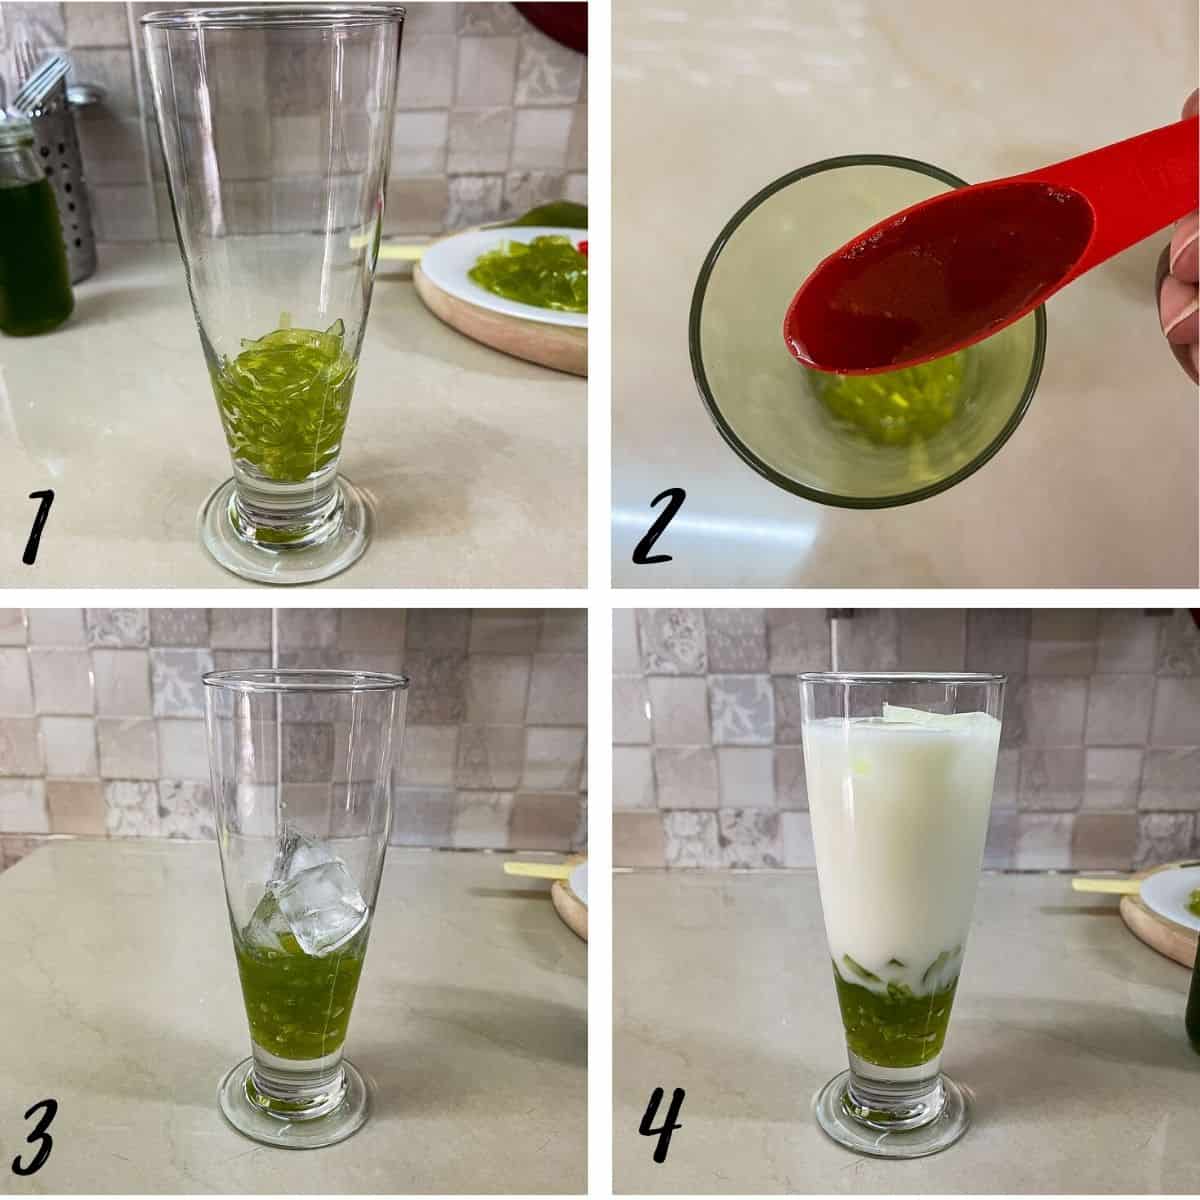 A poster of 4 images showing how to assemble pandan milk with pandan jelly boba.